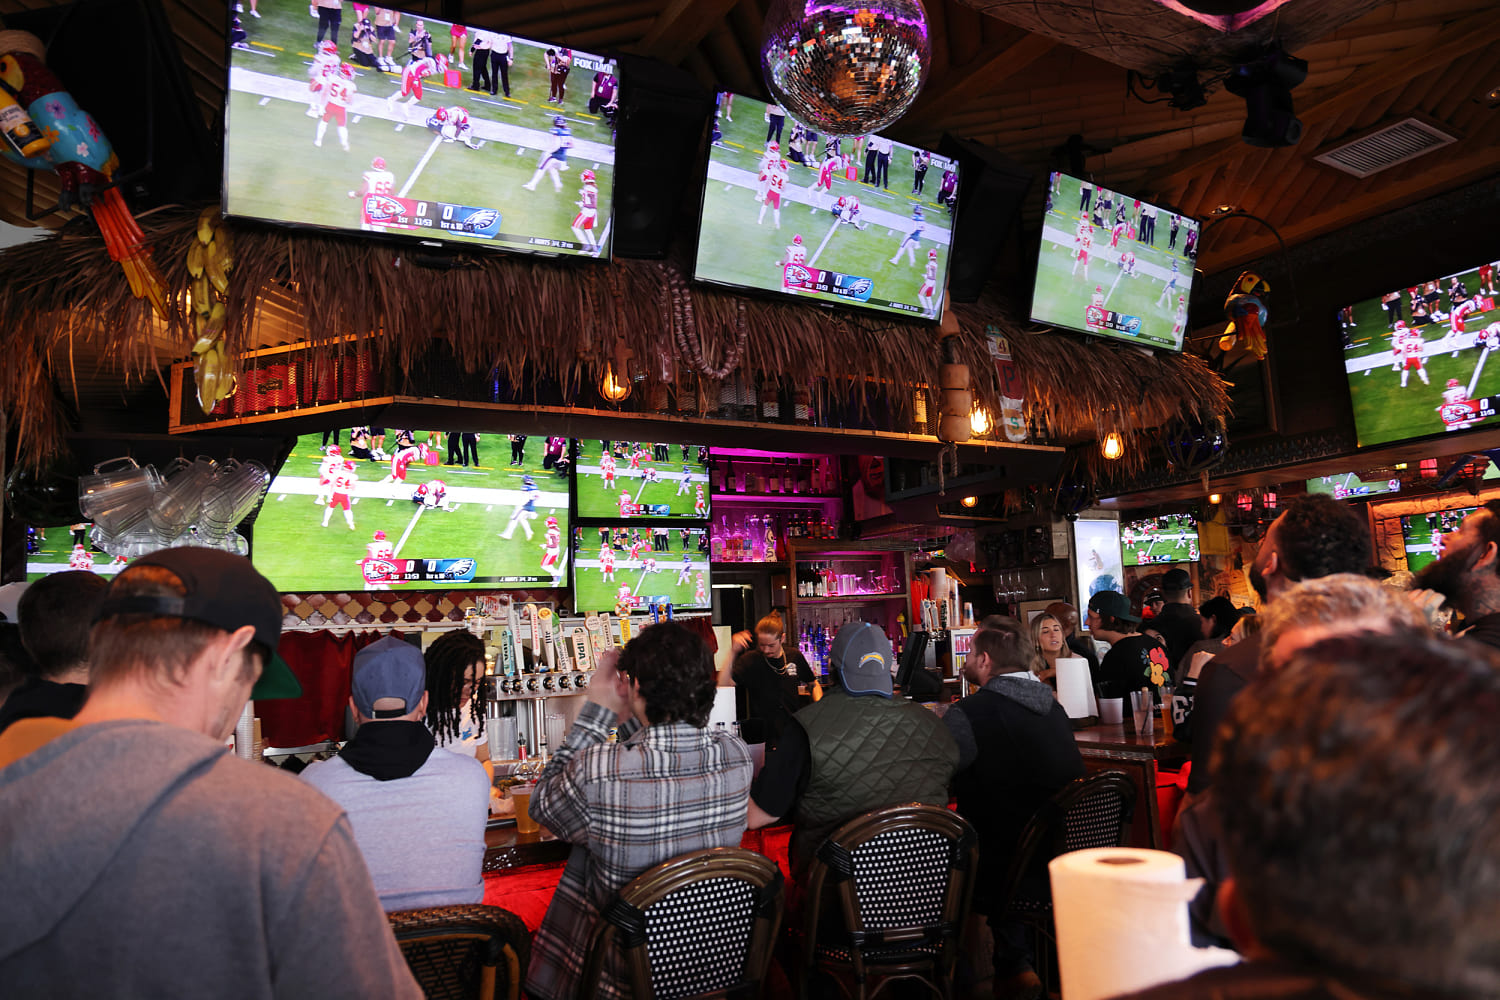 NFL-backed group lines up 'Sunday Ticket' streaming for bars, restaurants